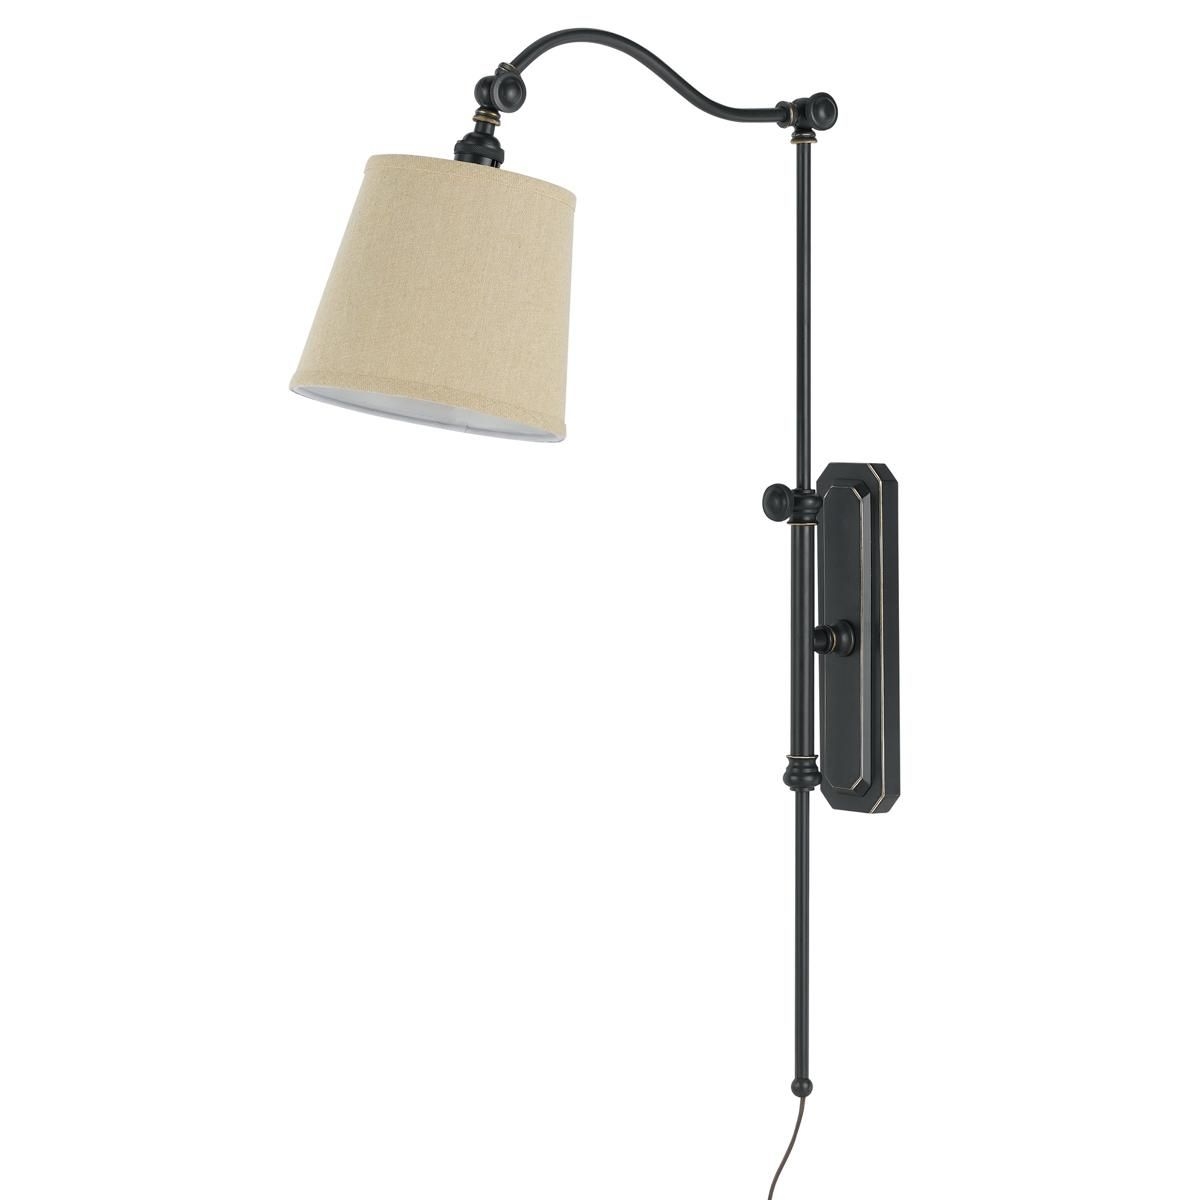 Arch swing arm wall lamp 5